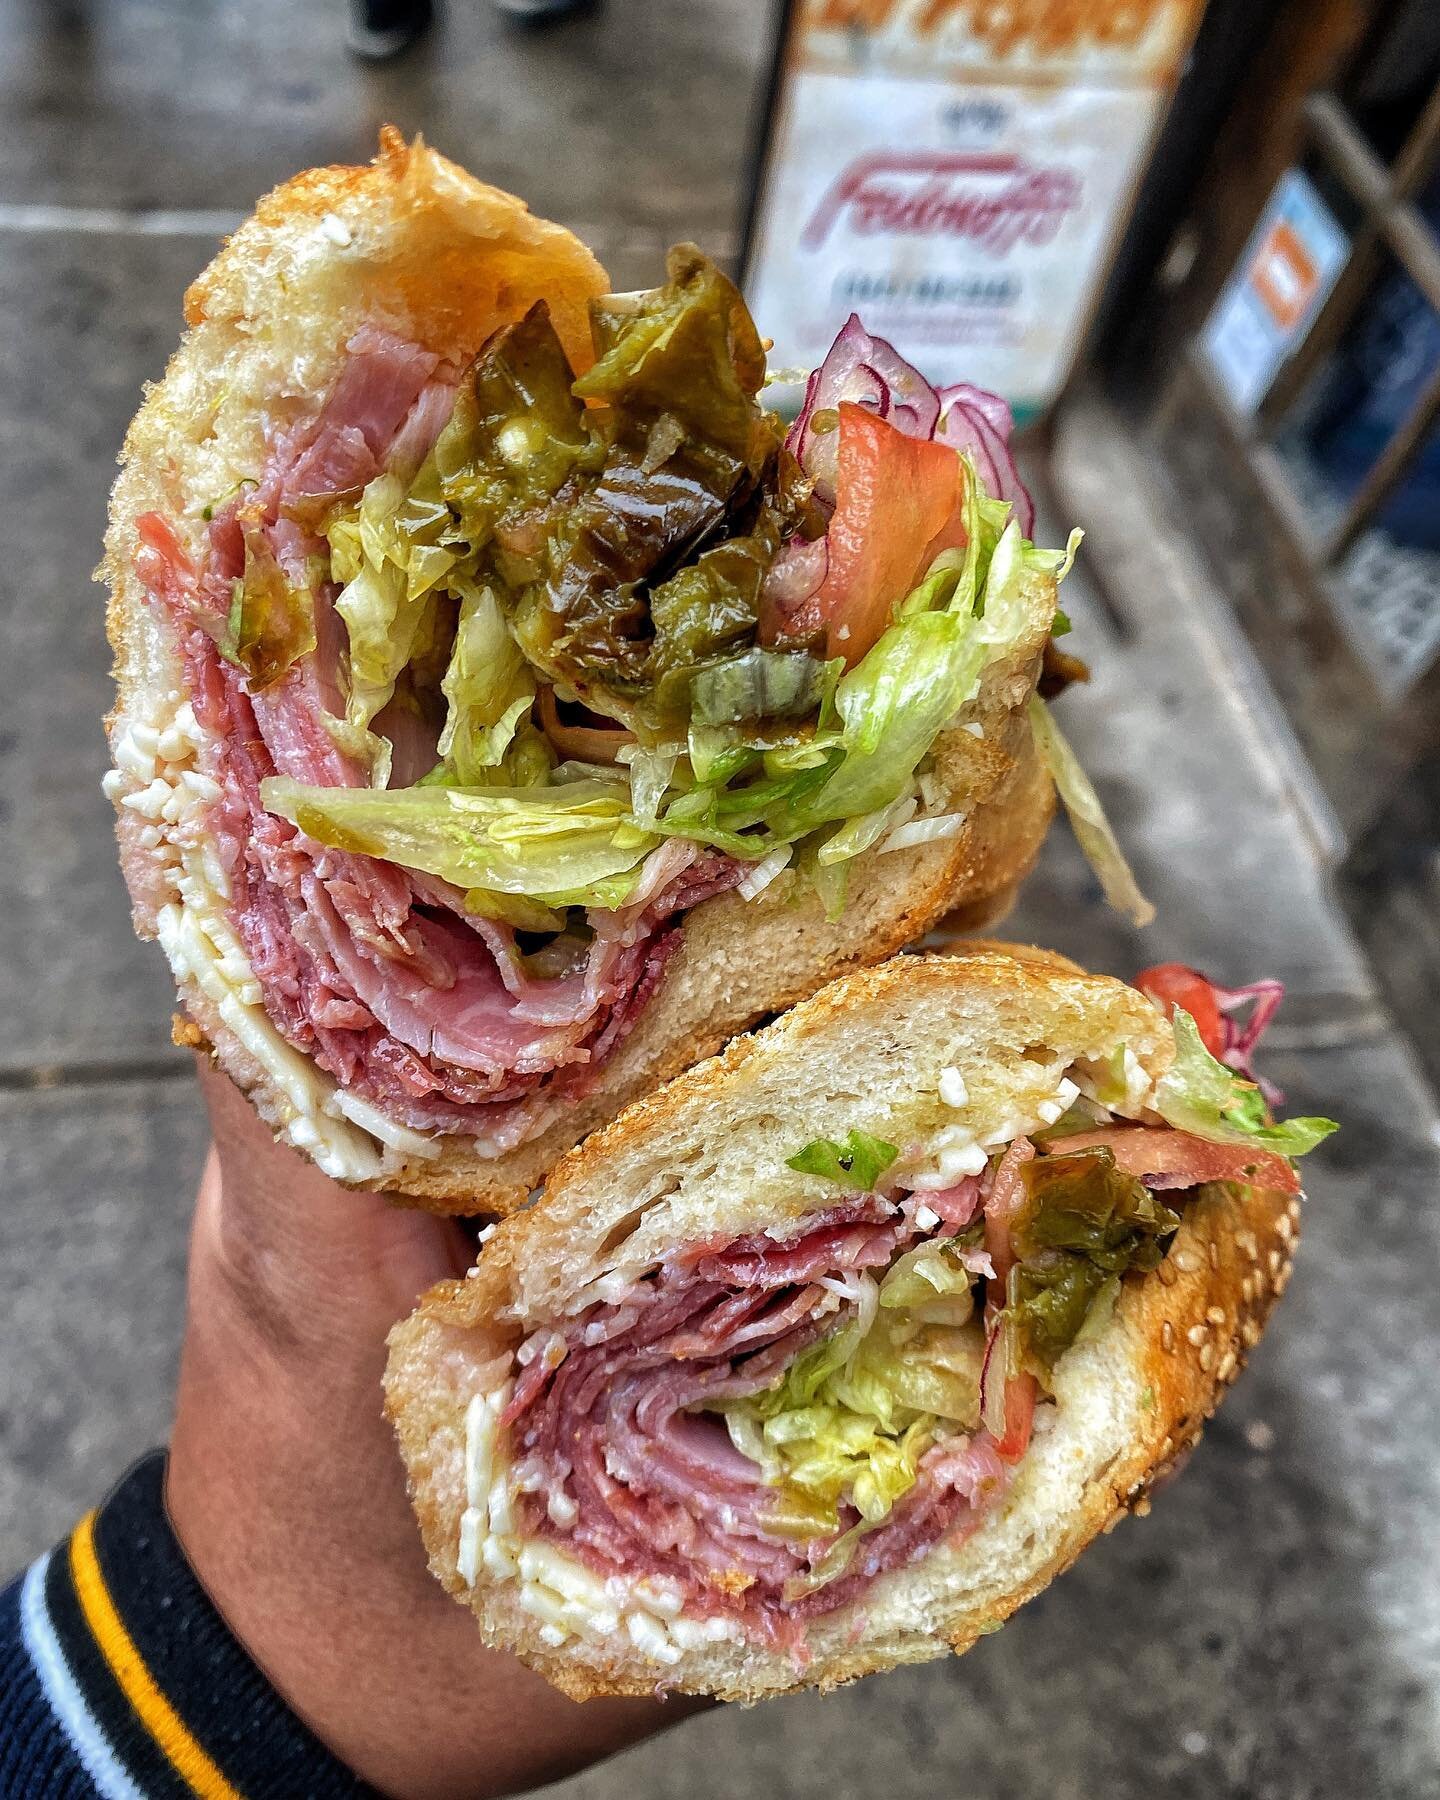 Casual #HumpDay VIBES! 🤤
🇮🇹 On WEDNESDAY, get a medium ITALIAN HOAGIE only $6.95!
‼️ WILLIAMSBURG LOCATION, UNTIL SOLD OUT‼️
#FEDOROFFS
_________________
📦 NATIONWIDE SHIPPING available via @GOLDBELLY‼️
🔗 Order ONLINE in our INSTAGRAM BIO or at 